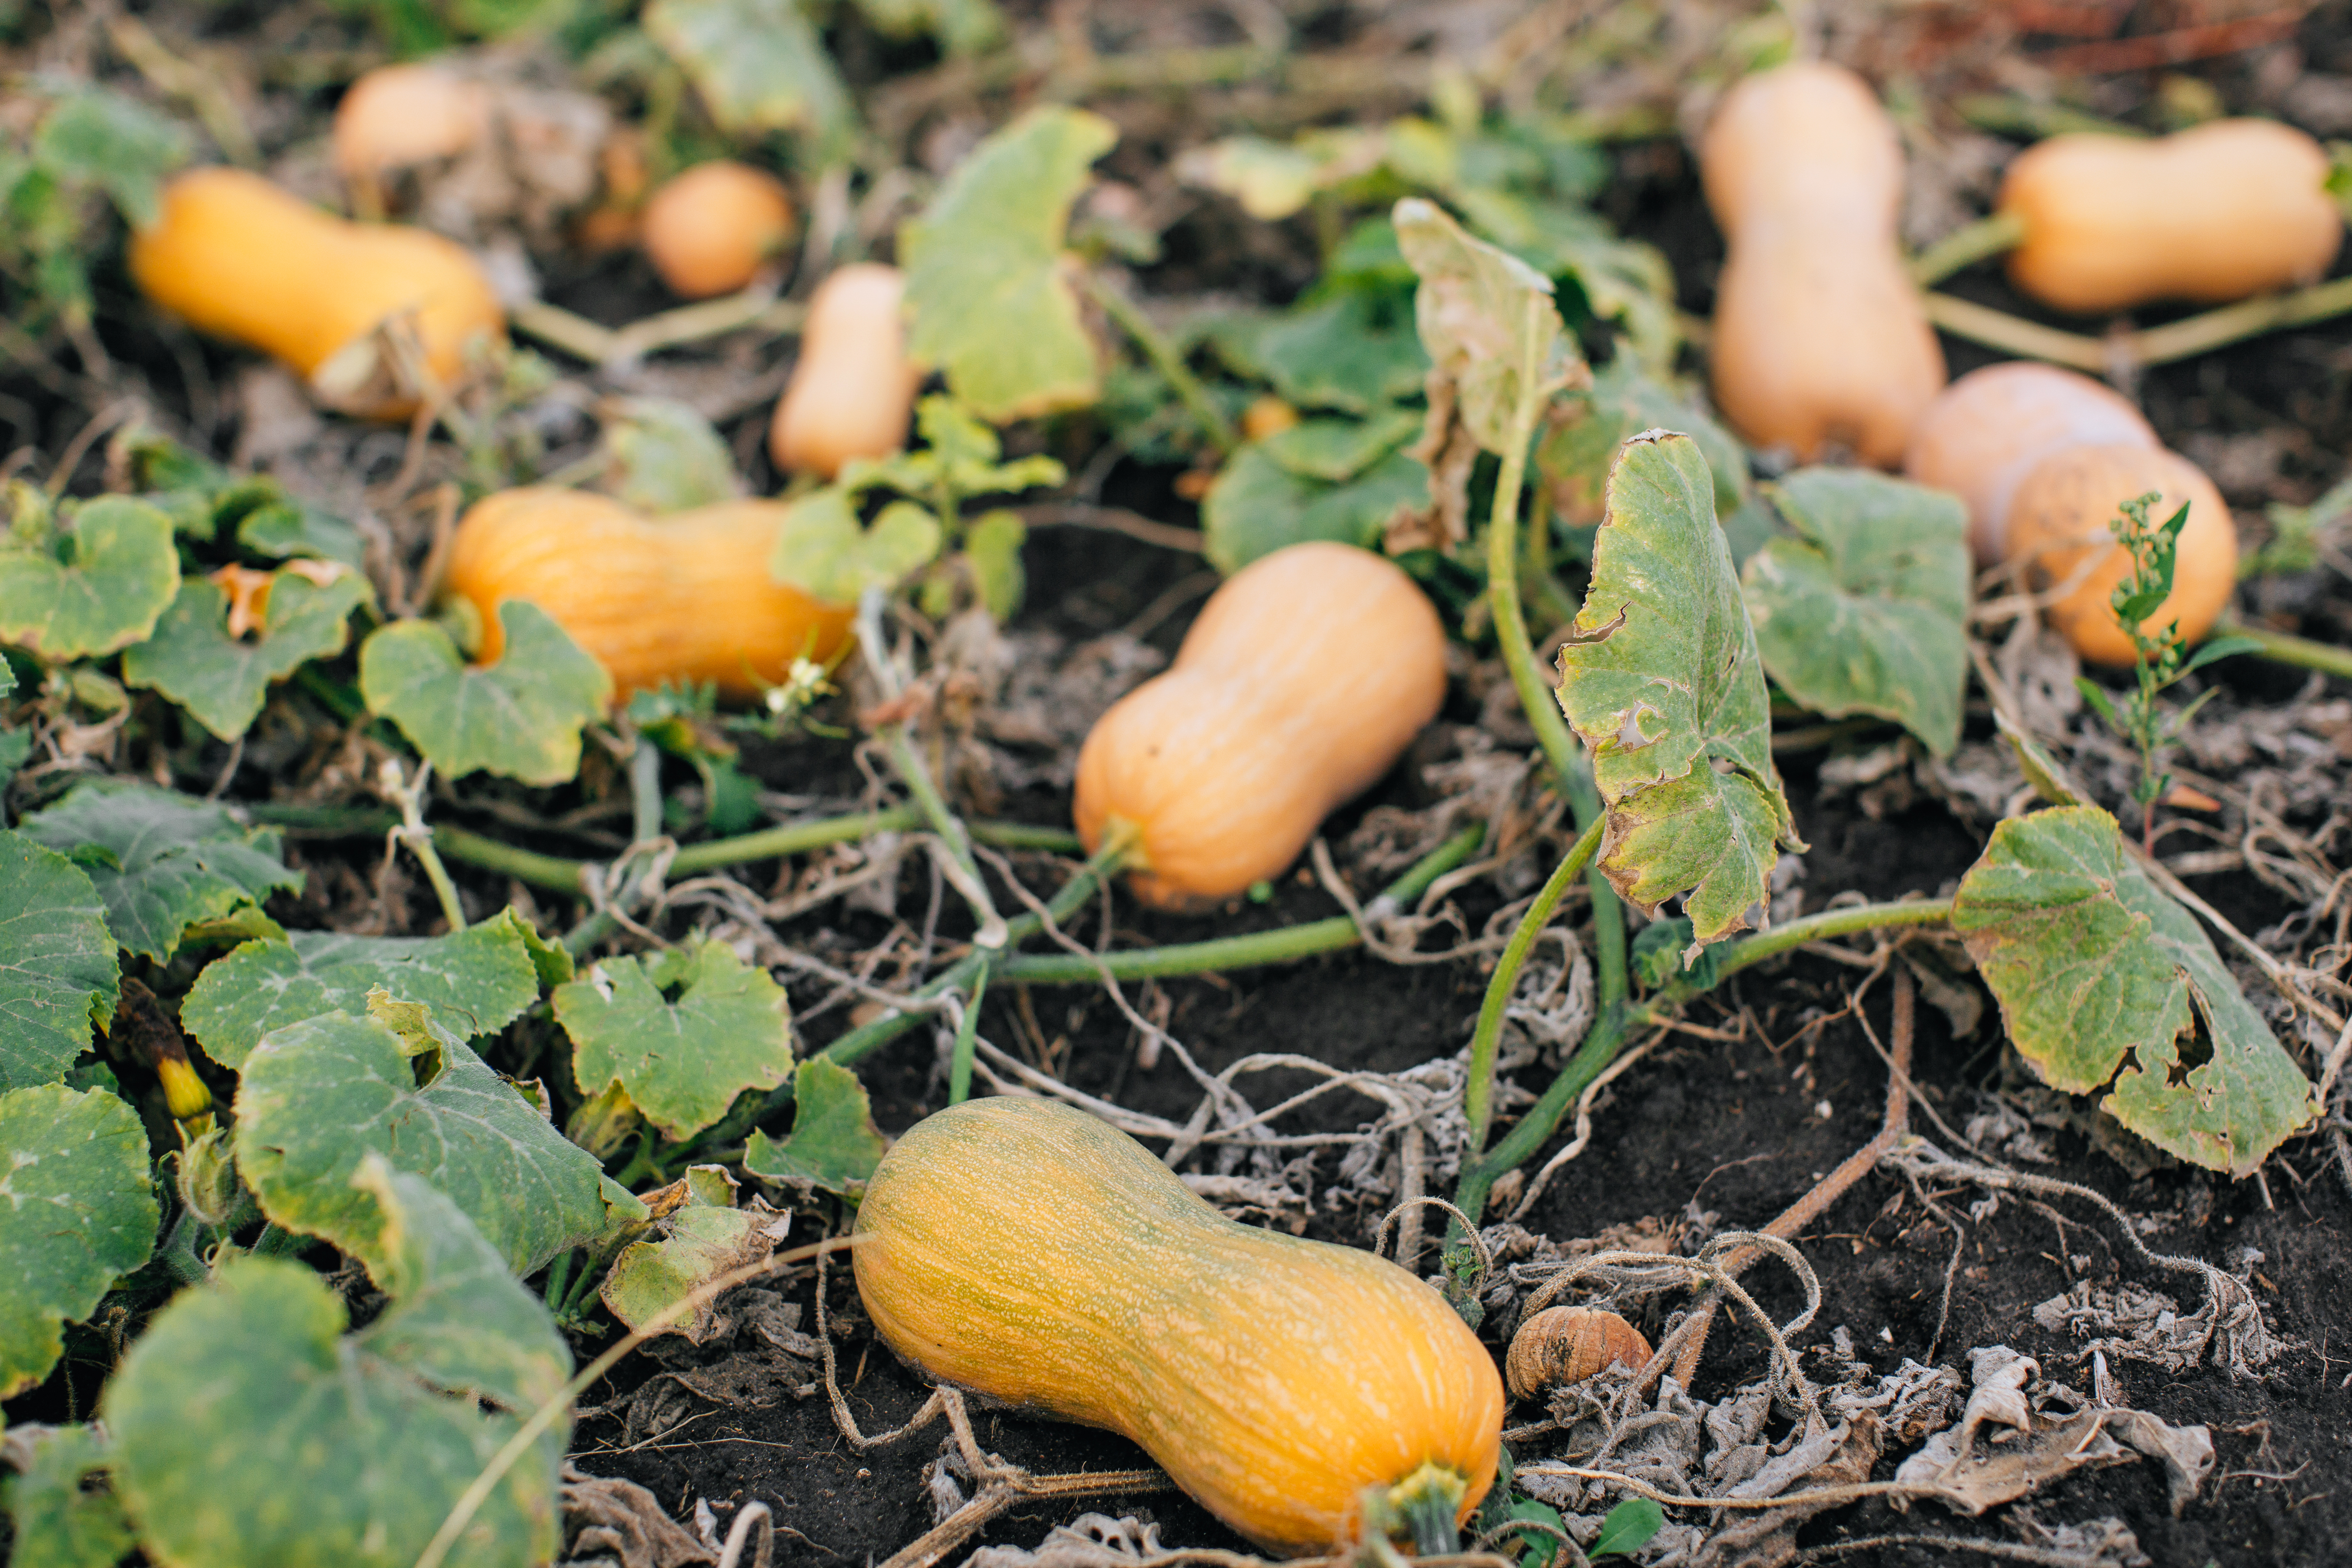 Squash plants in the field with ripe butternut squash